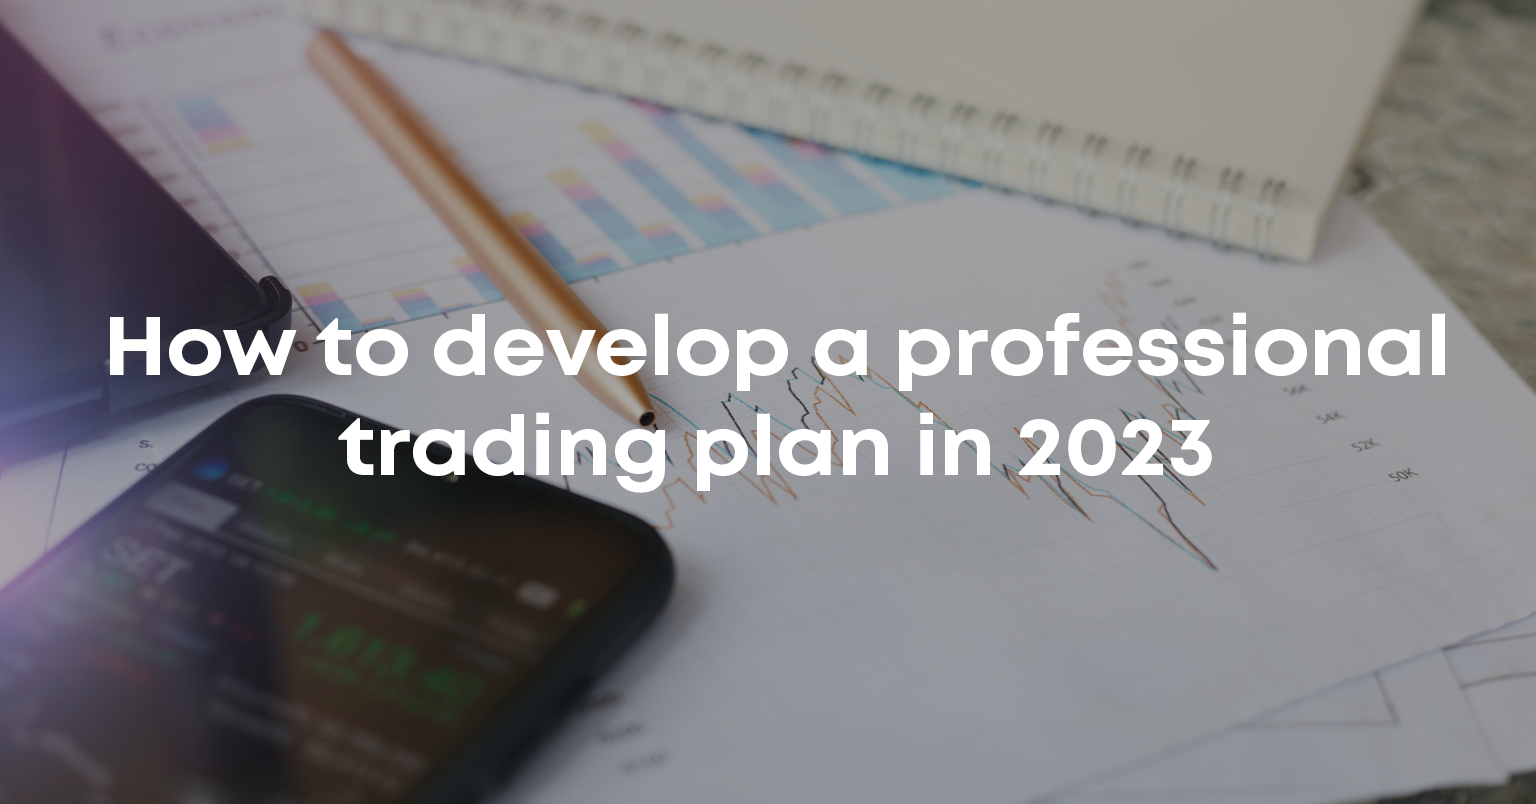  How to develop a professional trading plan in 2023